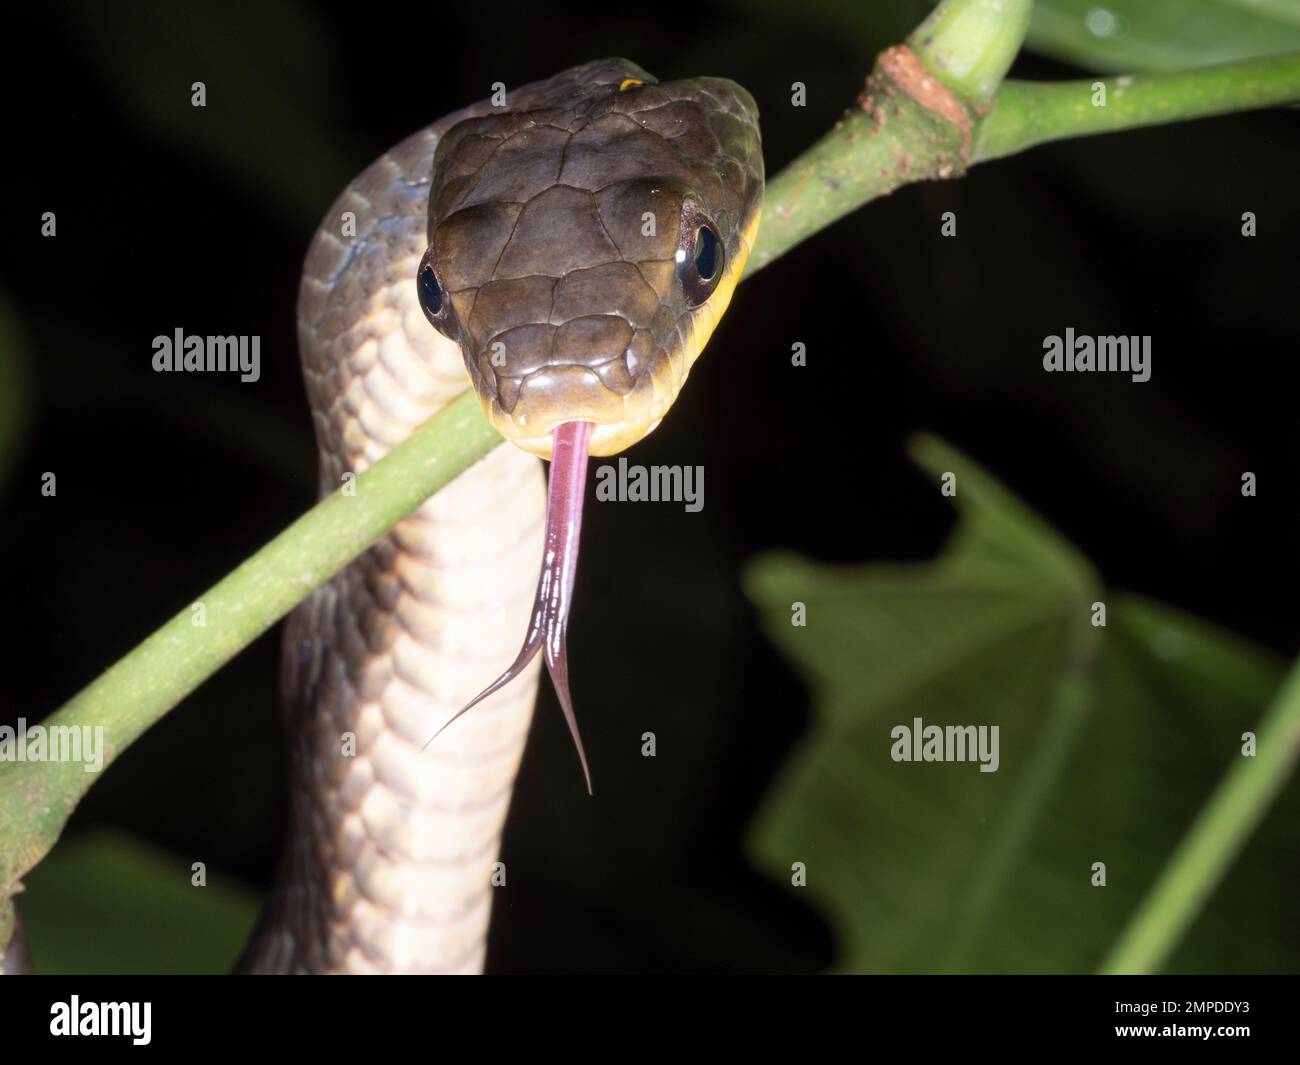 Yellow-bellied Puffing Snake (Phrynonanax polylepis) climbing in the rainforest at night, Orellana province, Ecuador Stock Photo